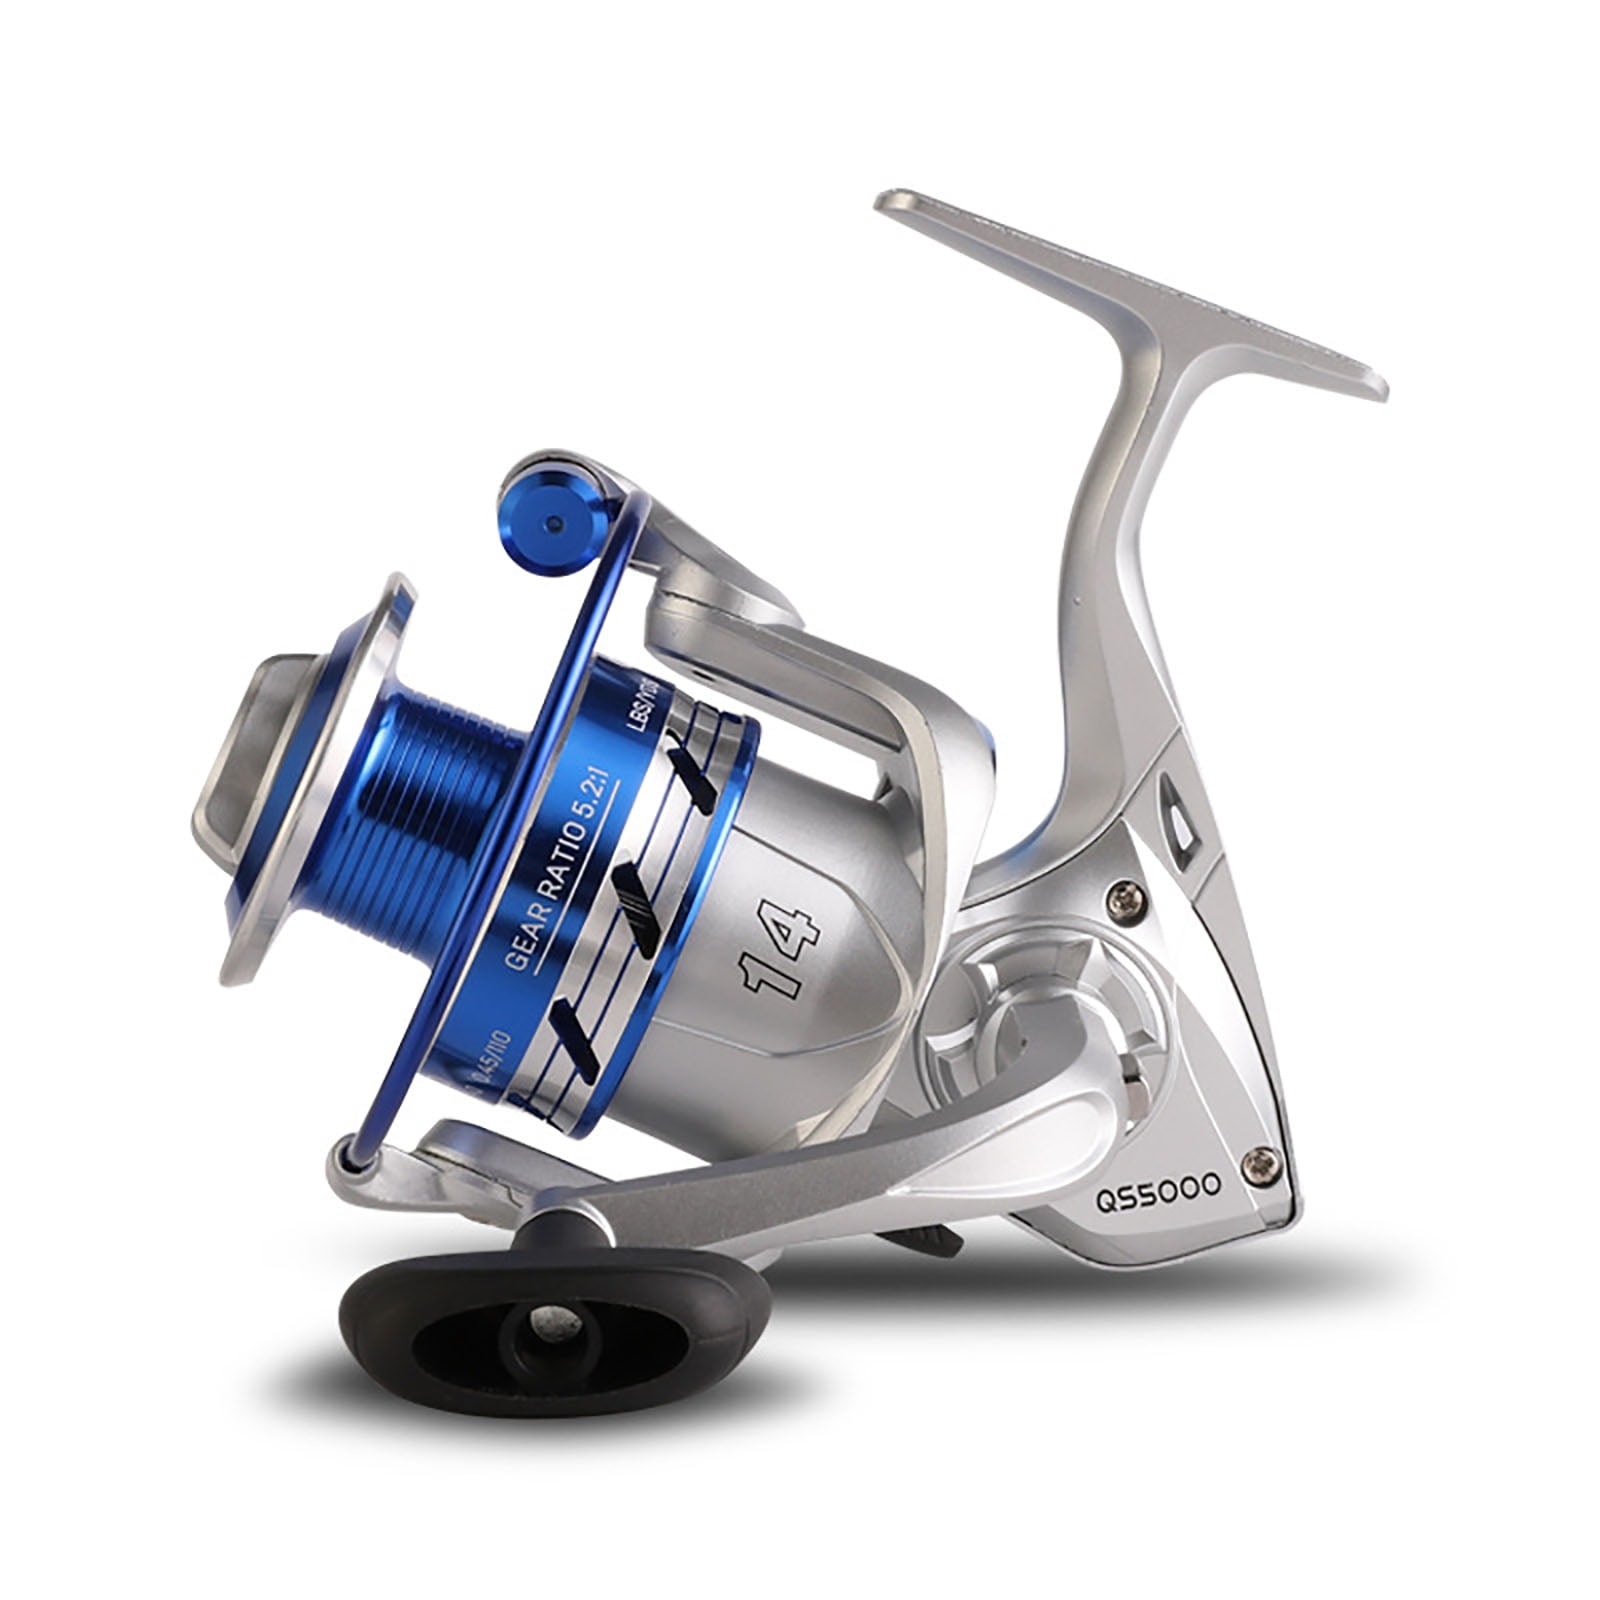 Lure Spinning Fishing Reel Max Drag 5kg Gear Ratio 5.2:1 1000-7000 Spinning  Reel Fishing Tackle Accessories 